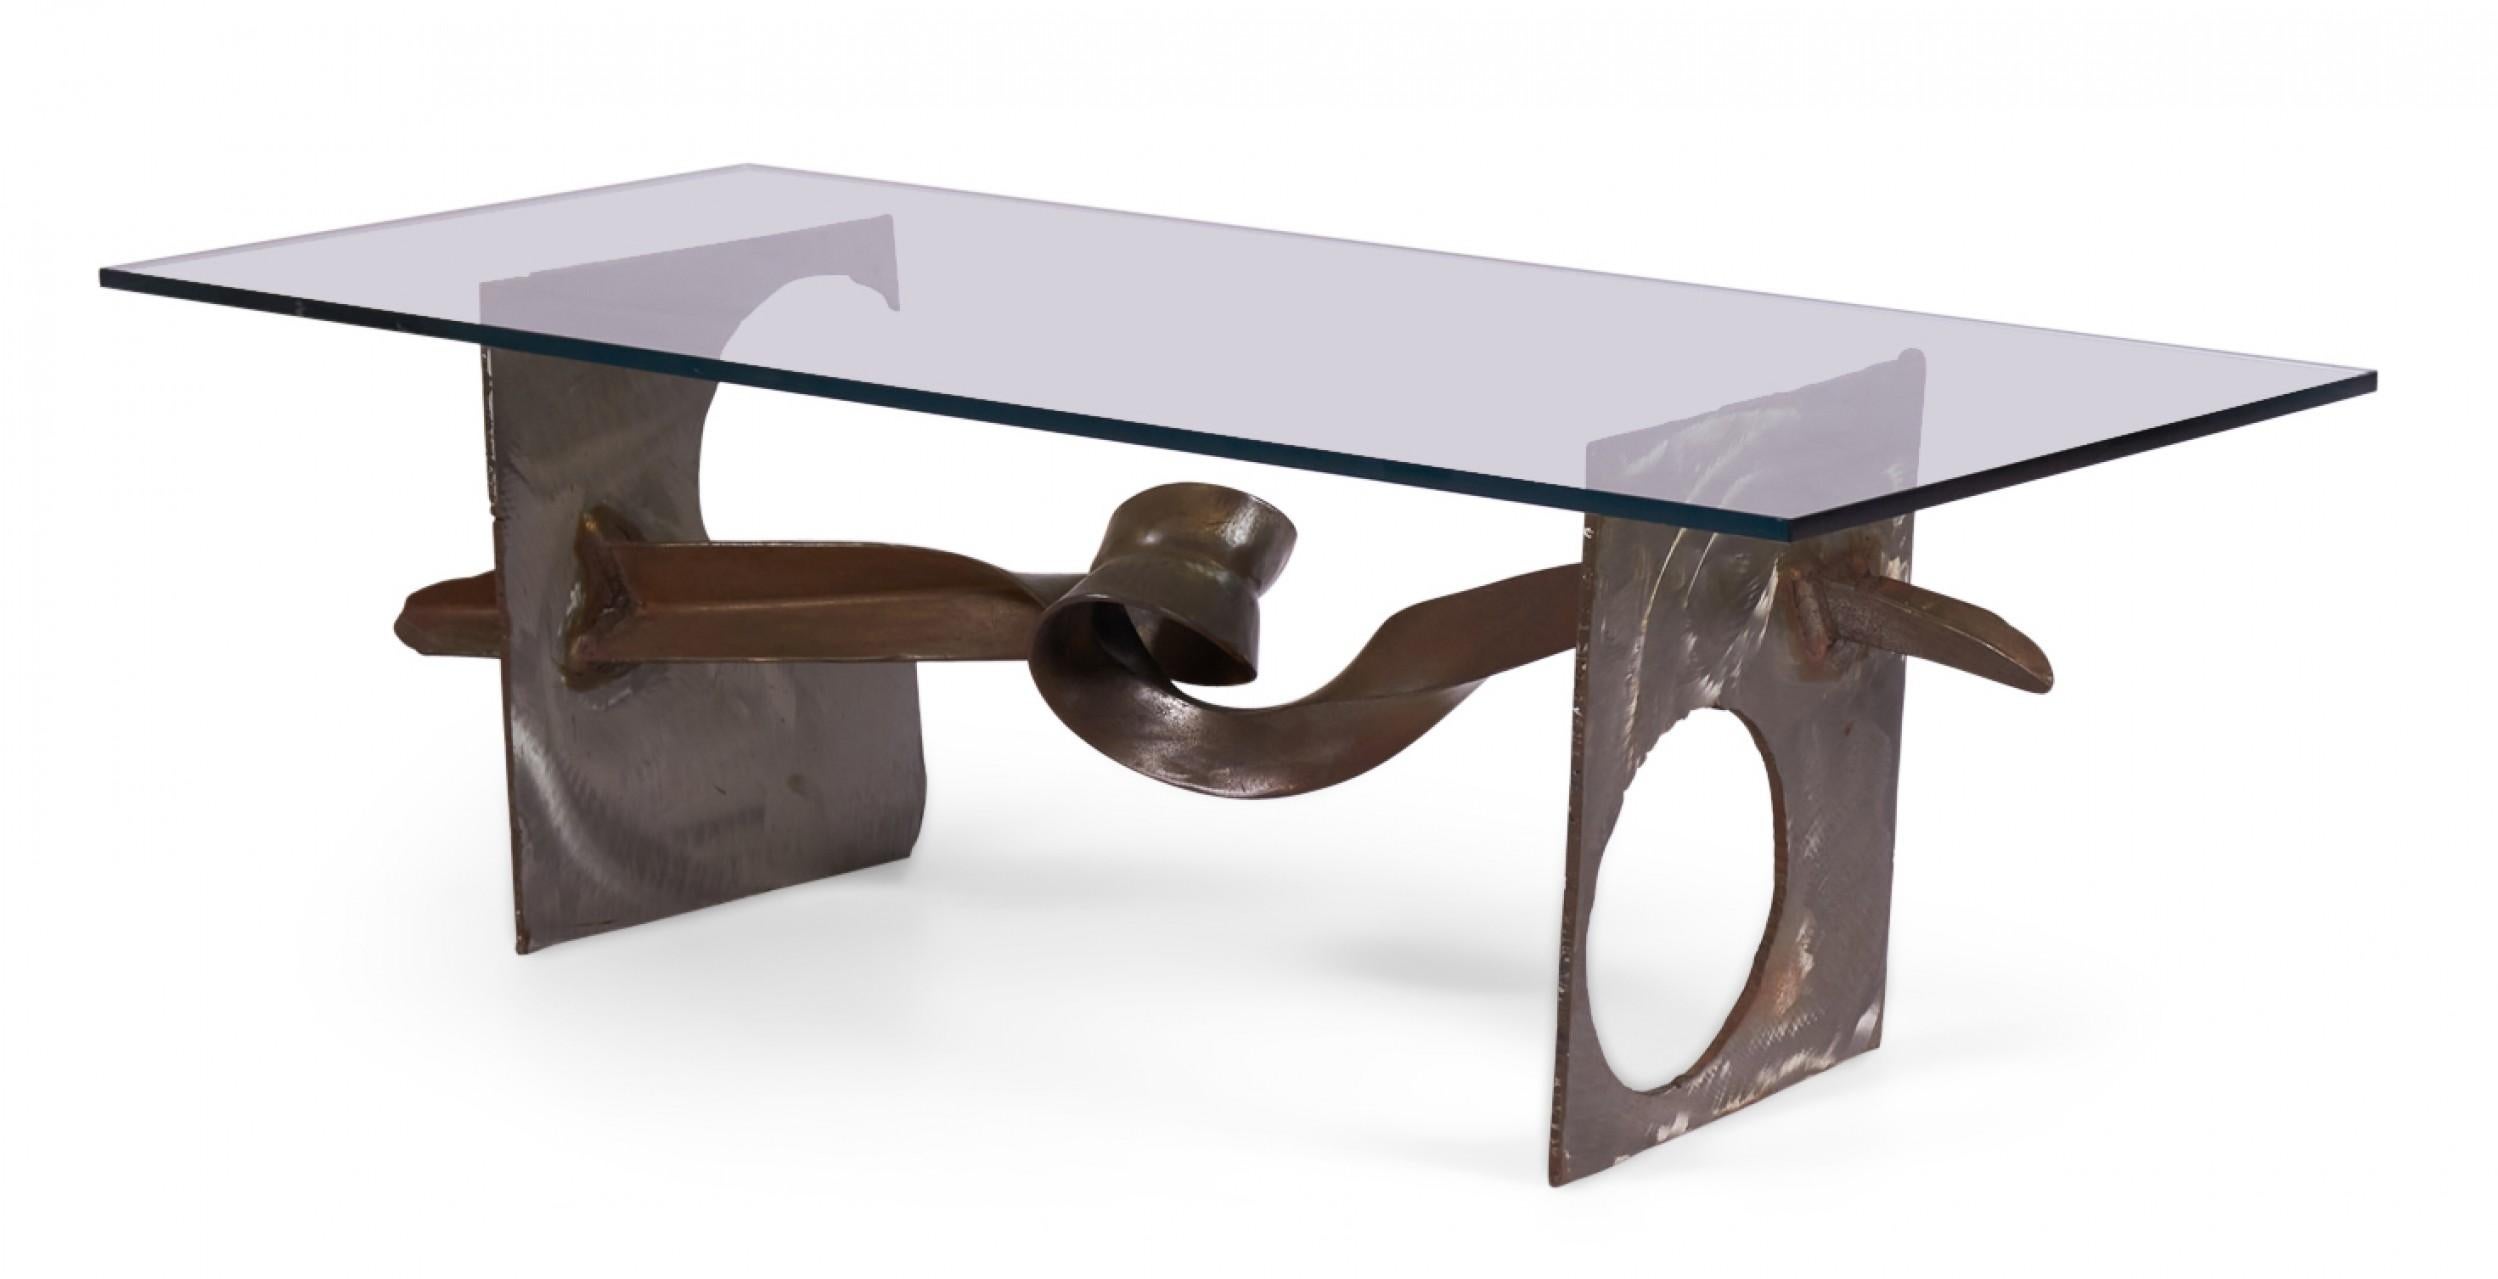 Silas Seandel Brutalist 'Tortured' Ribbon Steel Cocktail / Coffee Table In Good Condition For Sale In New York, NY